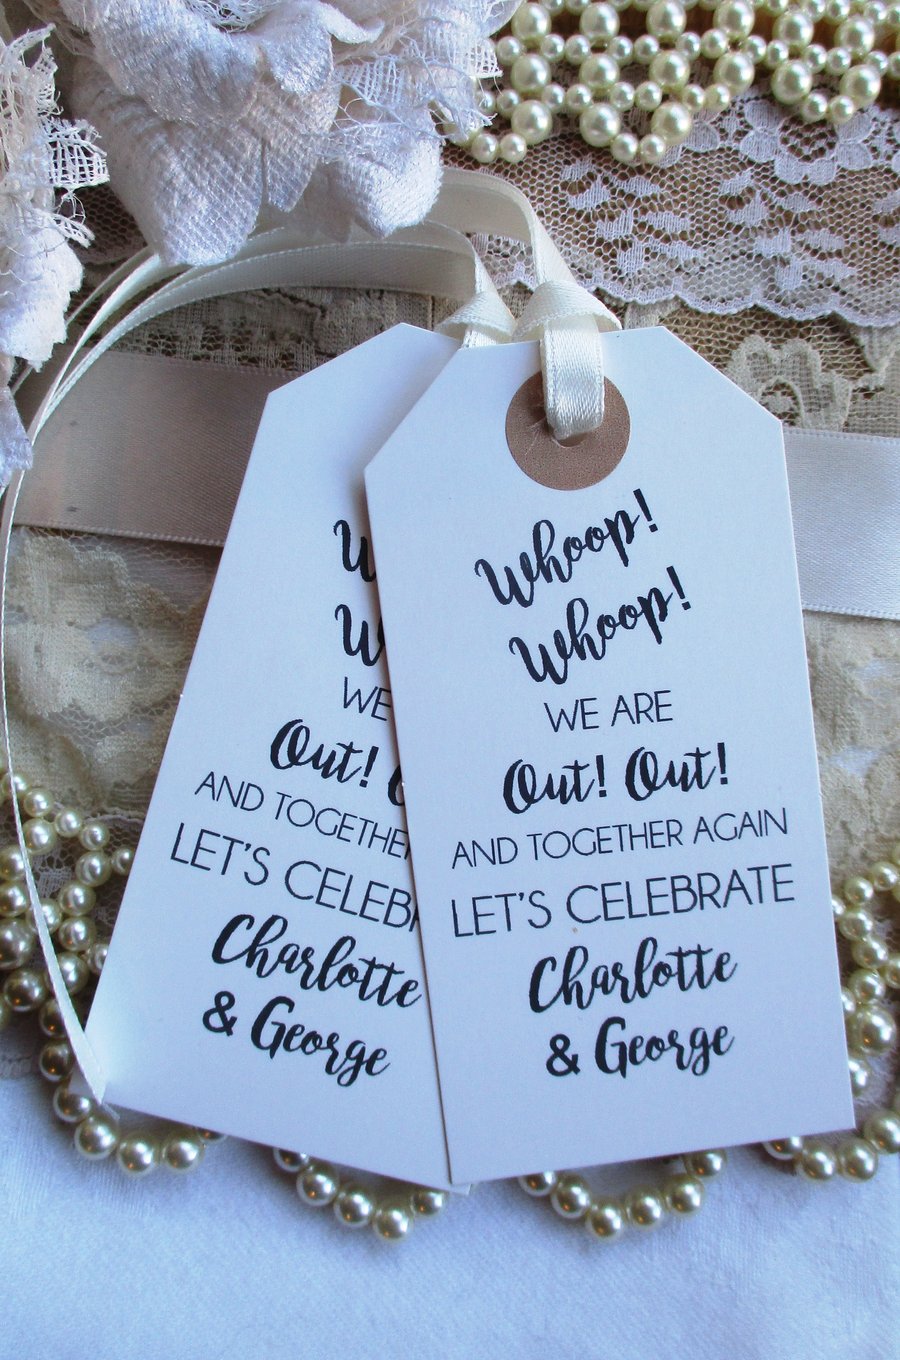 Whoop! Whoop! Wedding Party Celebration Personalized Fun Favours 